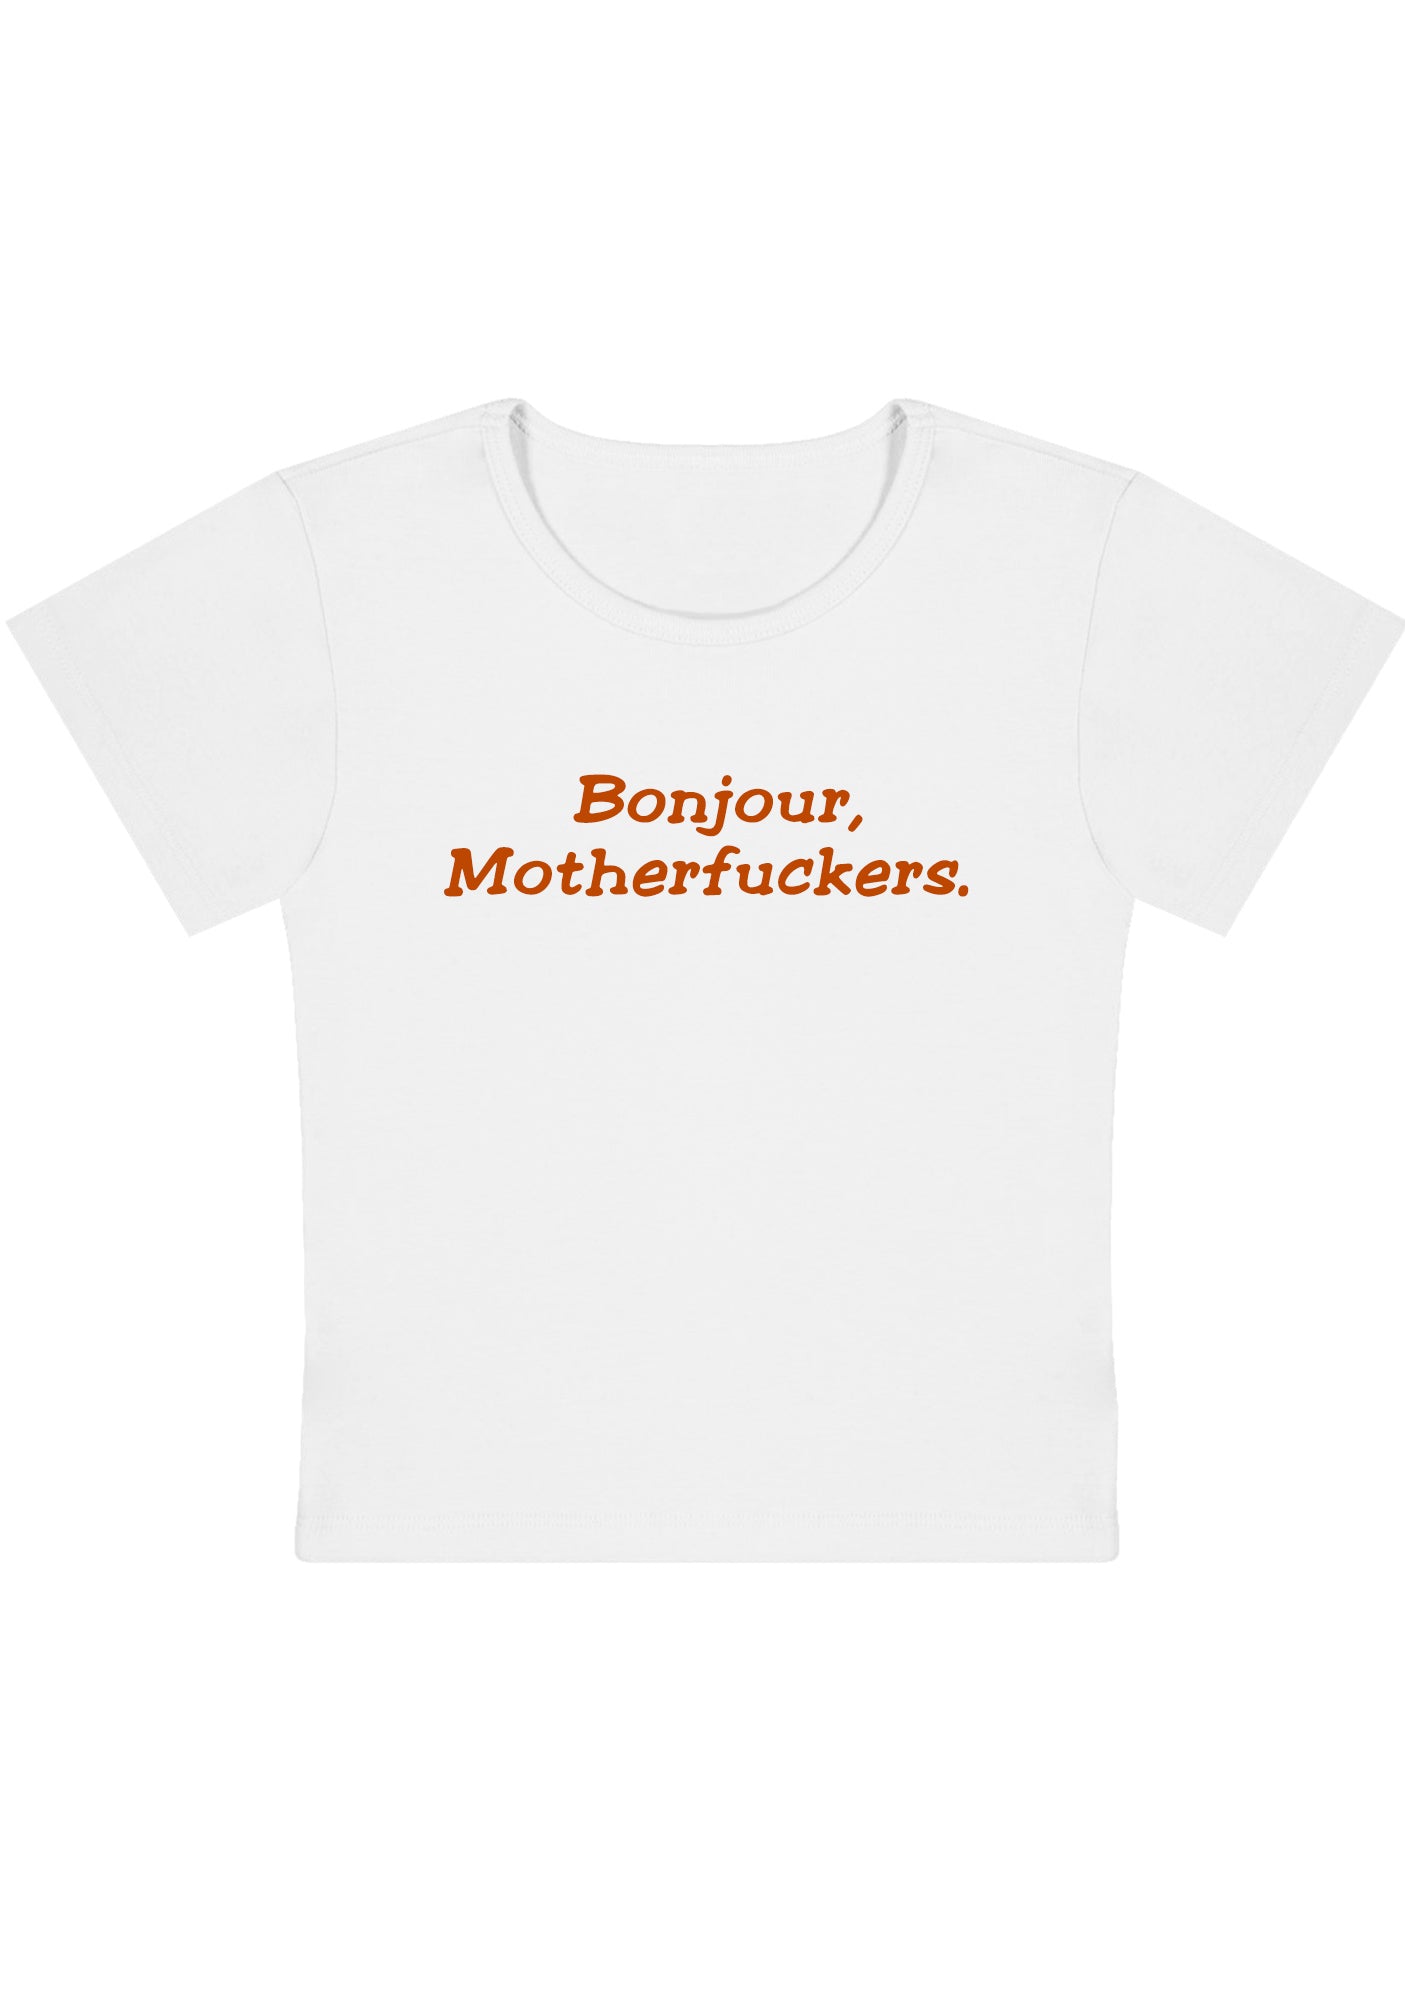 Bonjour Motherfuxkers Y2K Baby Tee